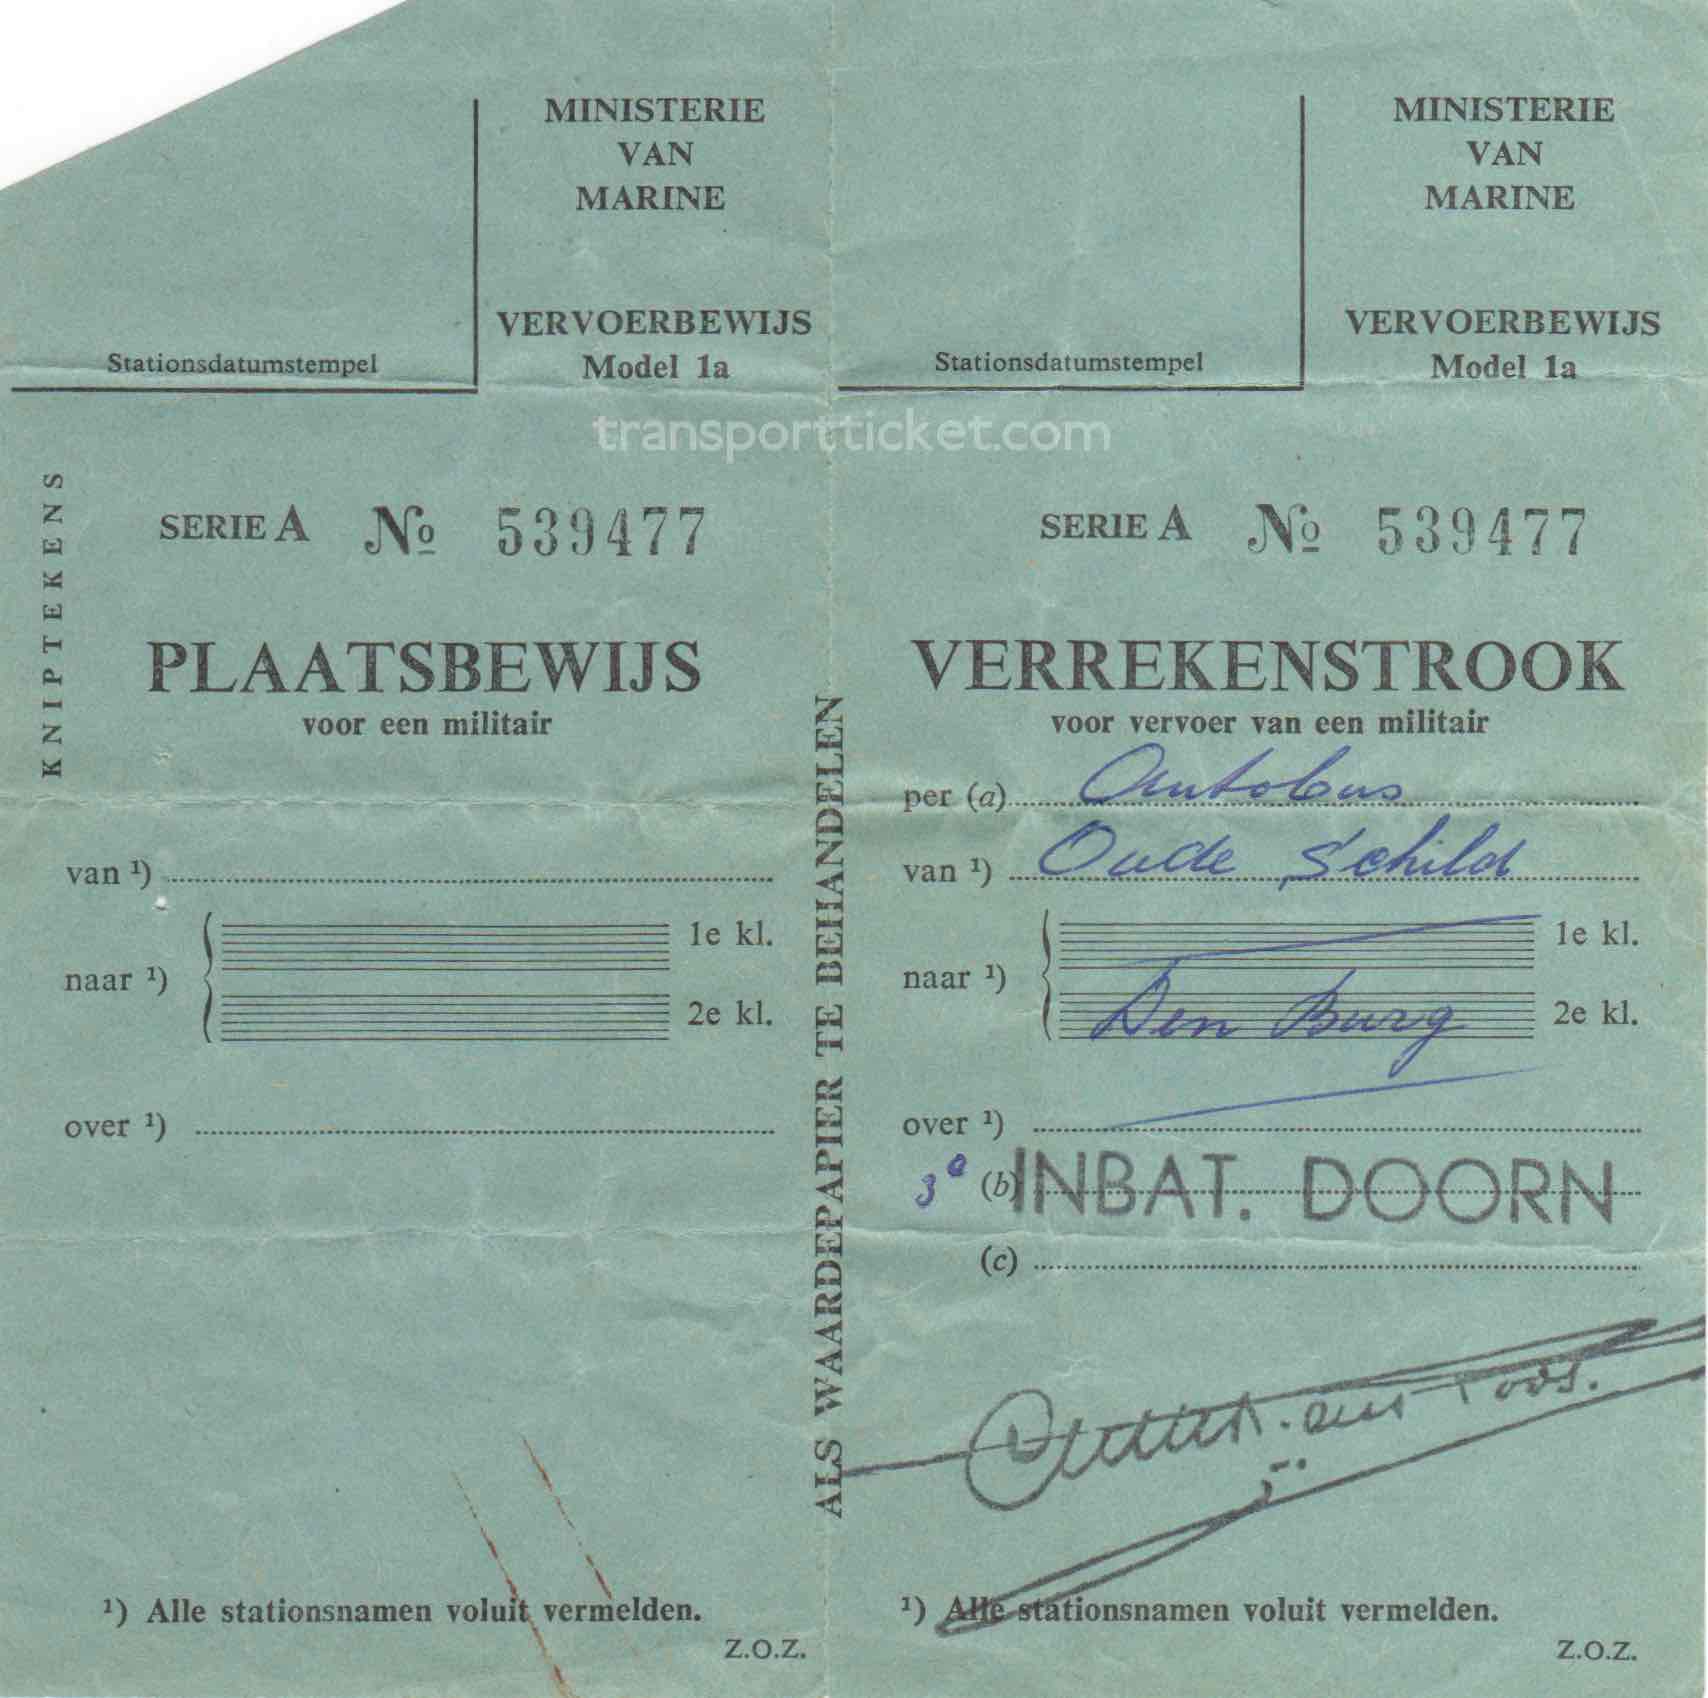 transport ticket issued by Dutch Ministry of Navy (1957)